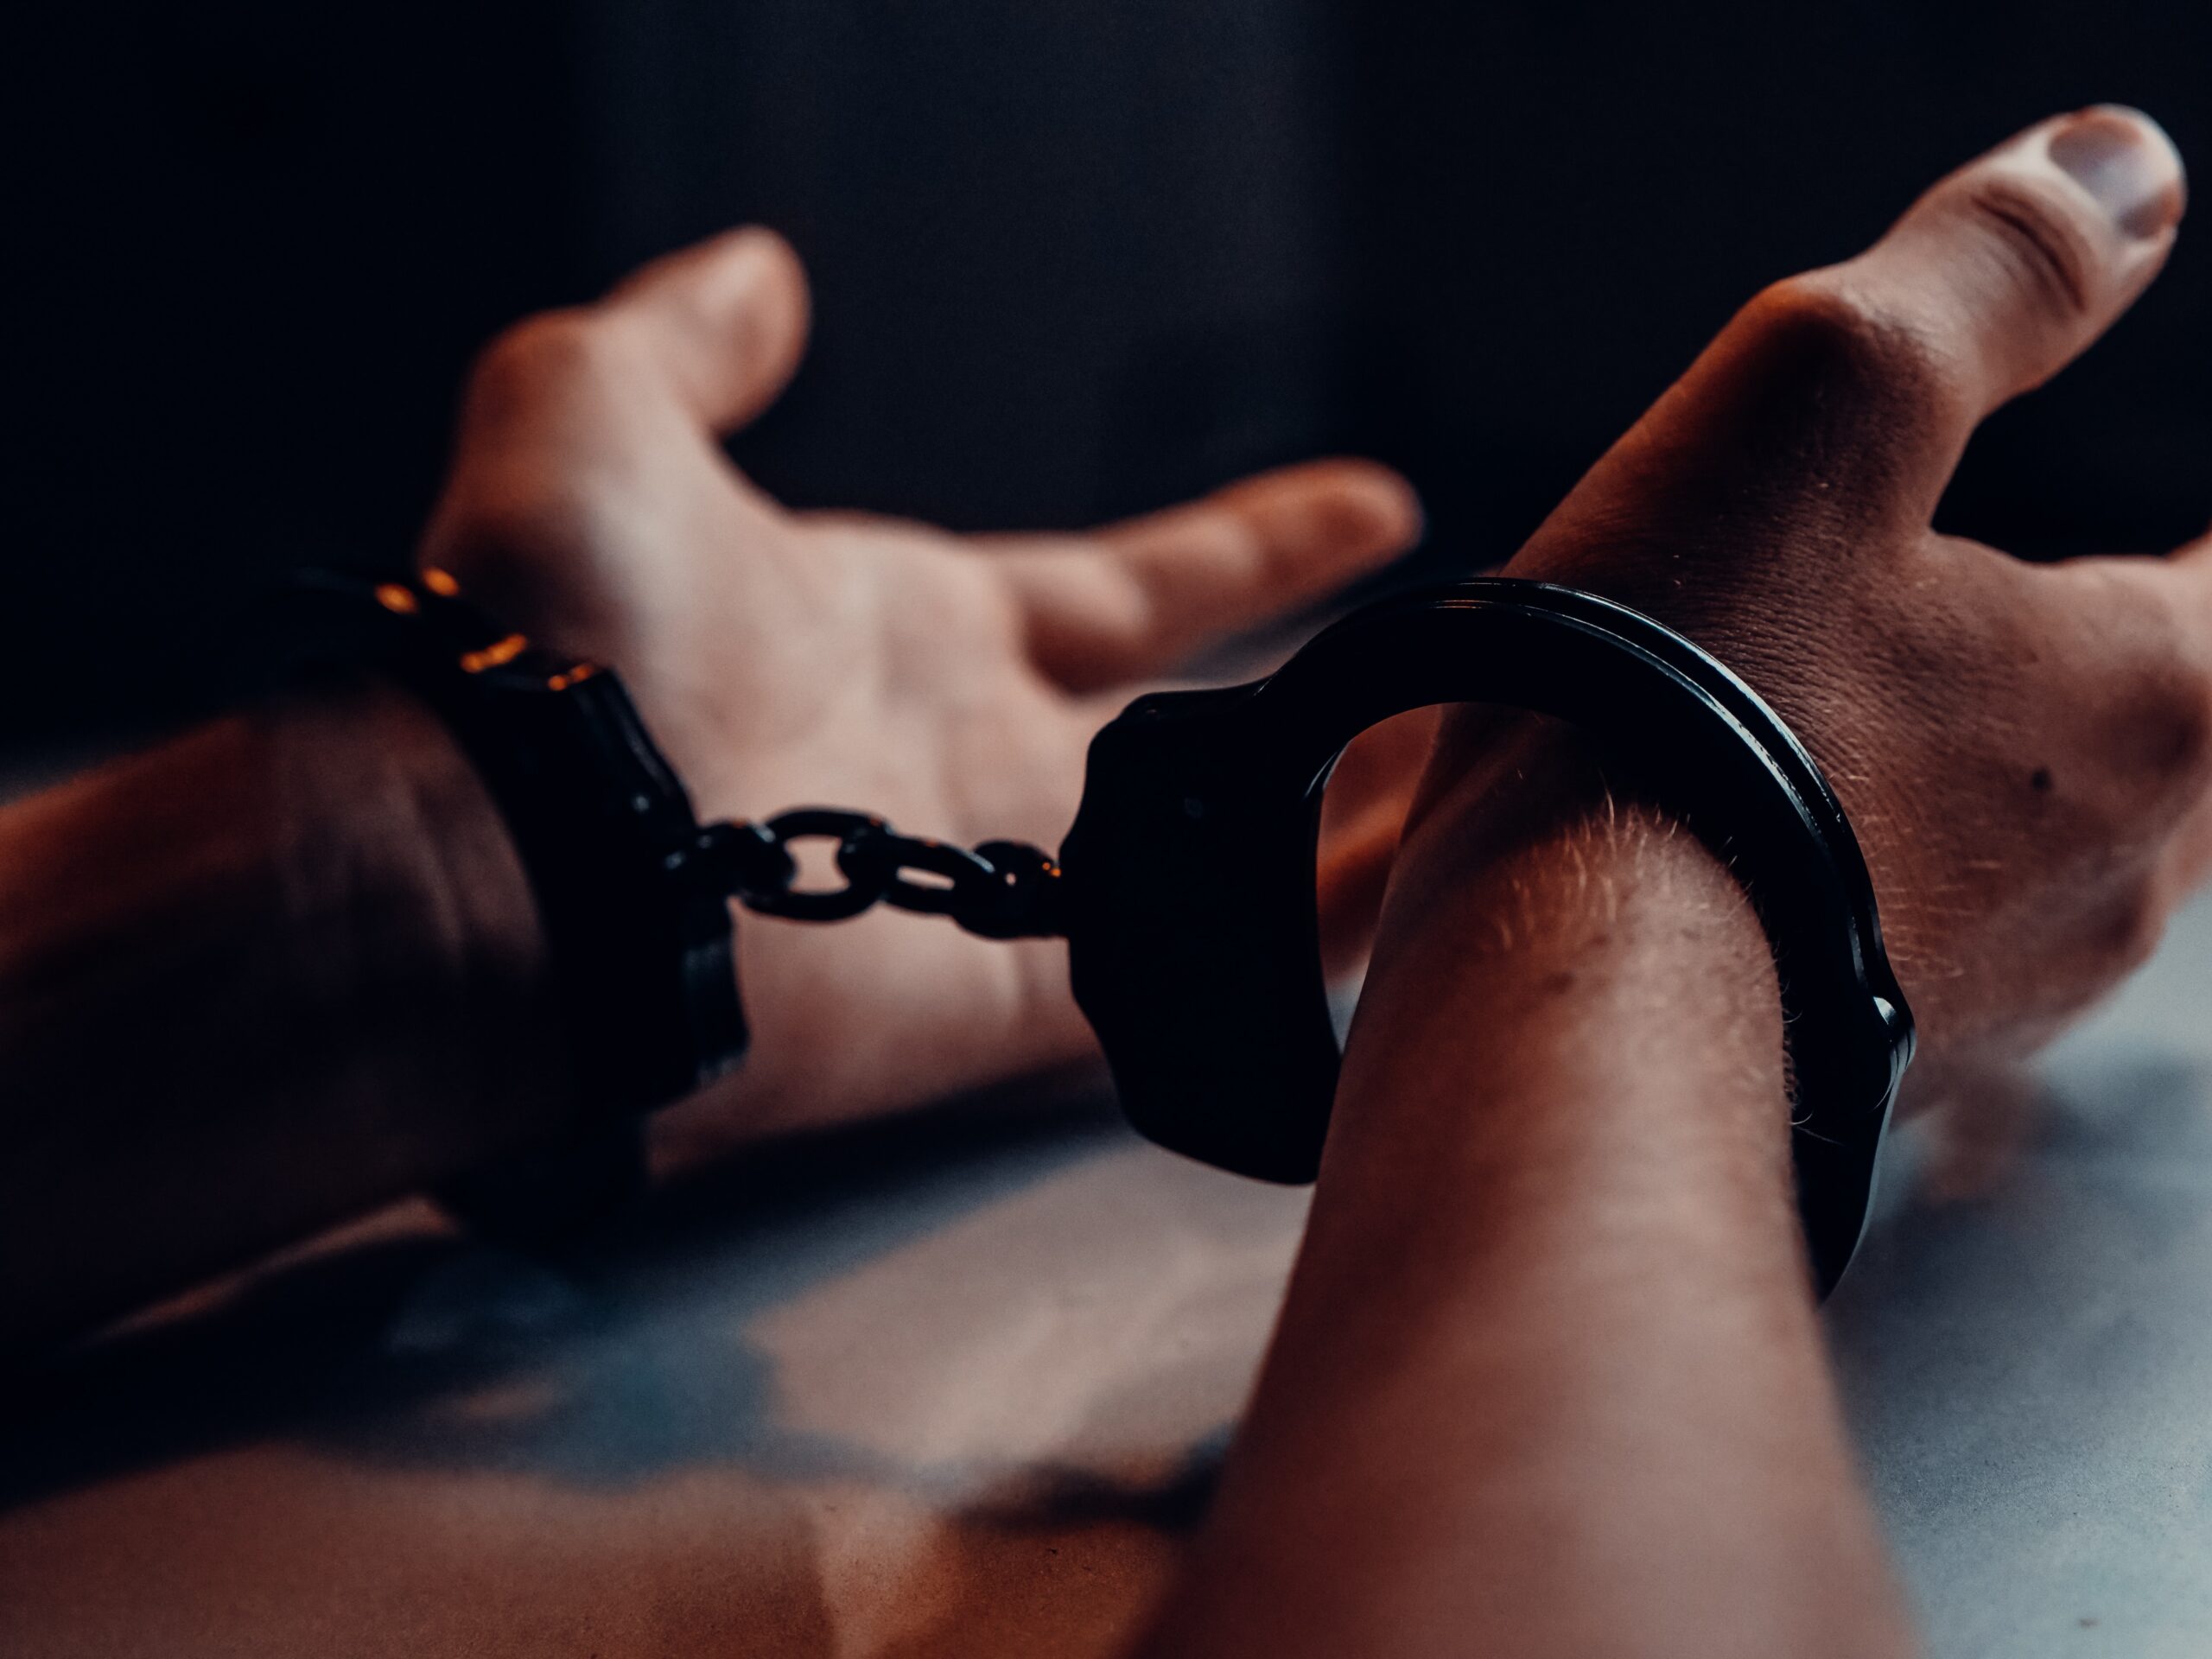 a person's hands in handcuffs